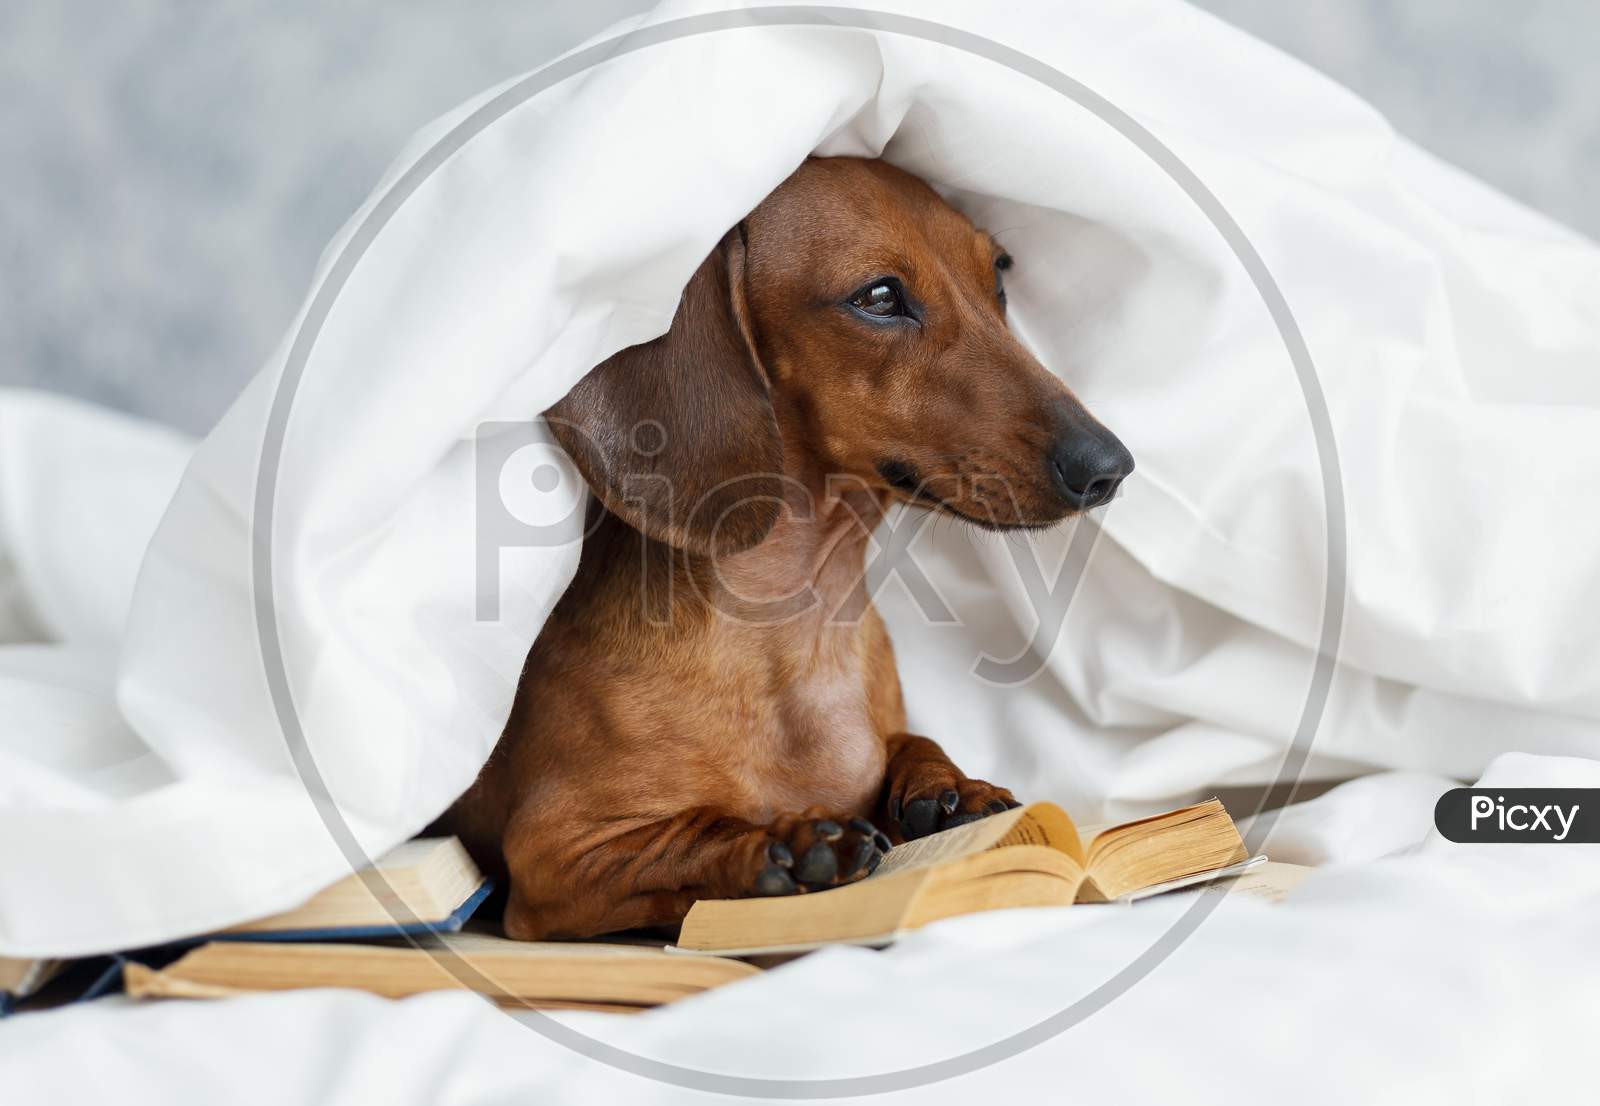 Adorable dog in bed with books